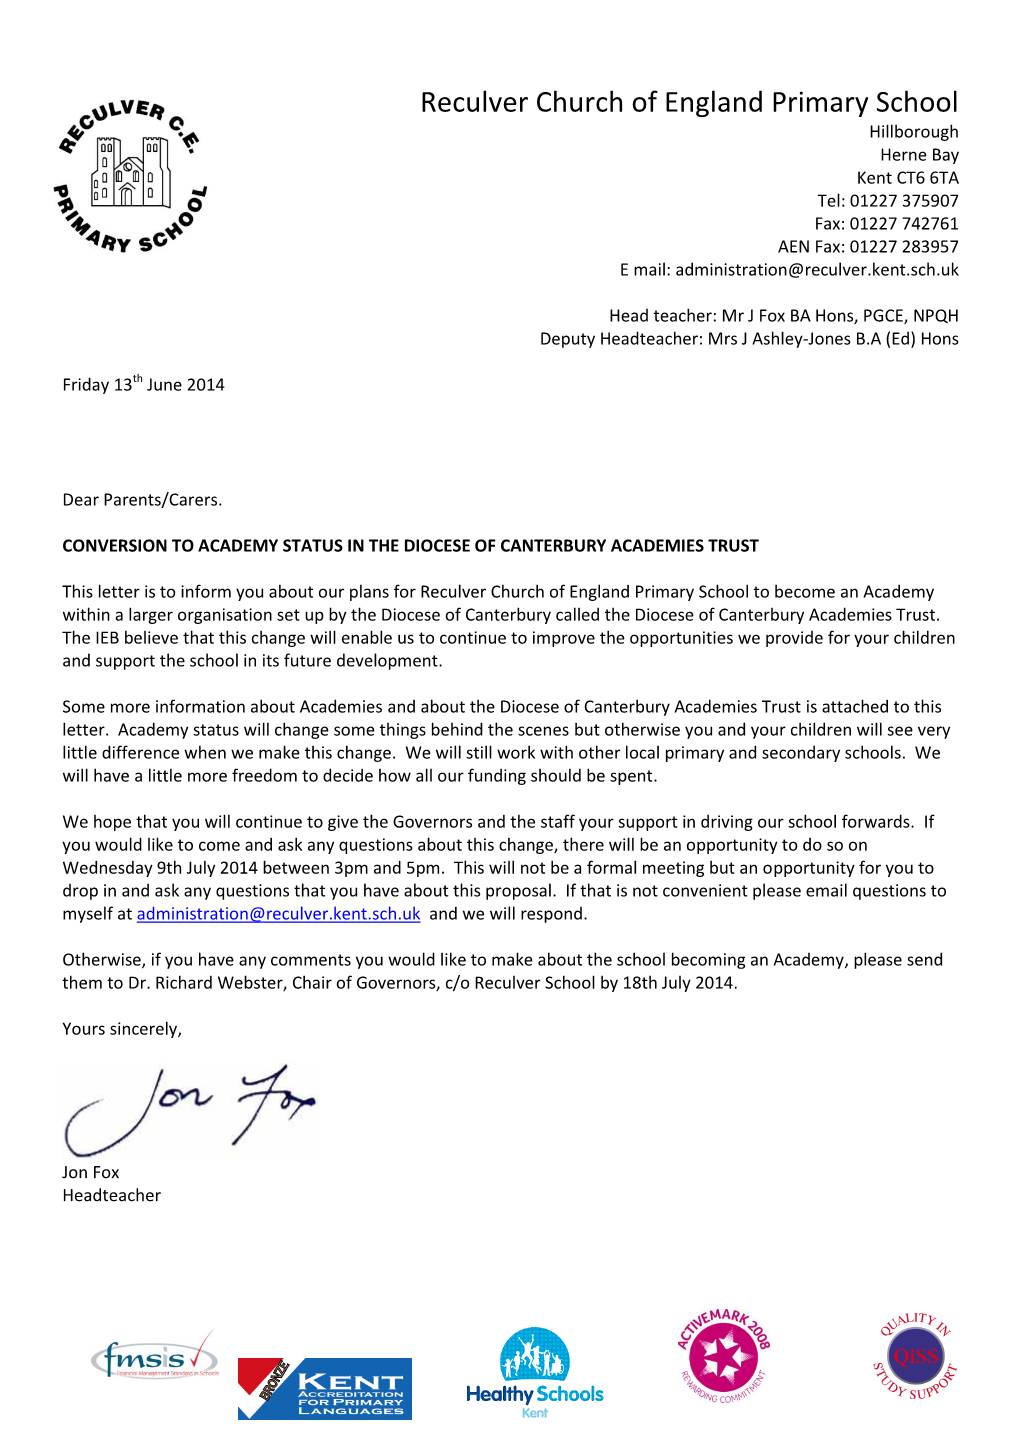 Letter to Parents Re Academy Status